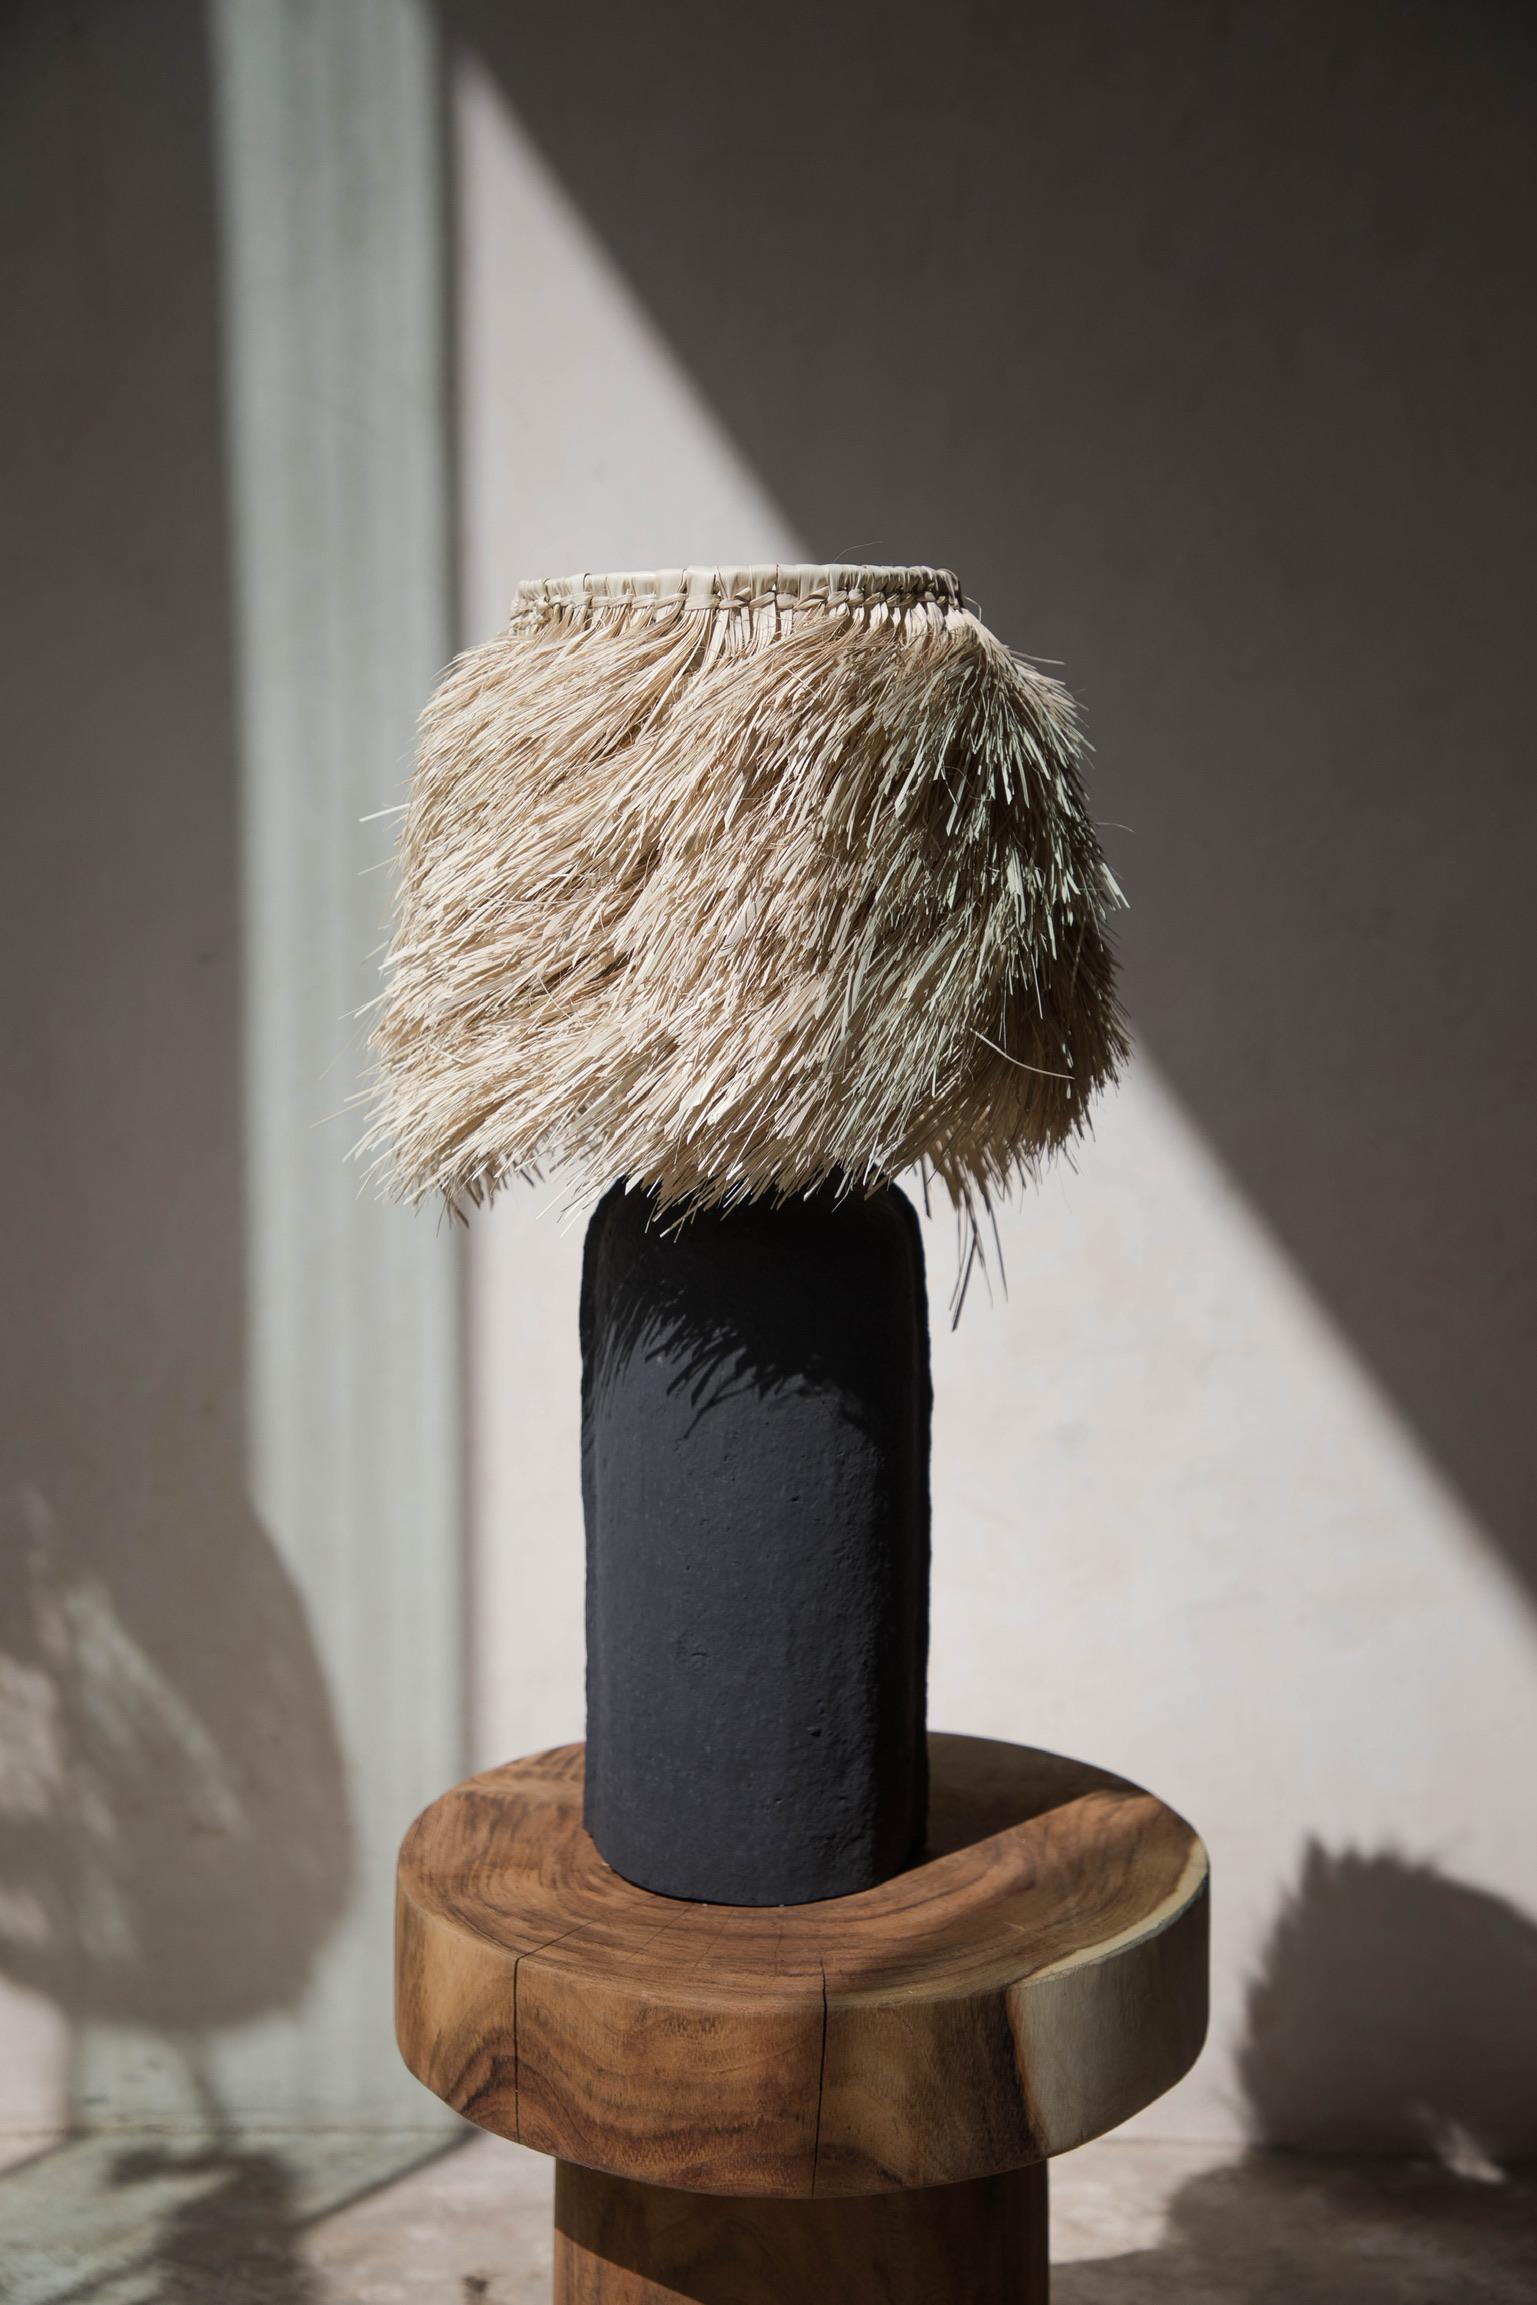 Black original L3 wood table lamp by Daniel Orozco
Material: Wood, paper.
Dimensions: D 20 x H 57 cm
Available in black or white finish.

Wood table lamp, black or white paper with palm screen. Handmade by Mexican artisans.

Daniel Orozco